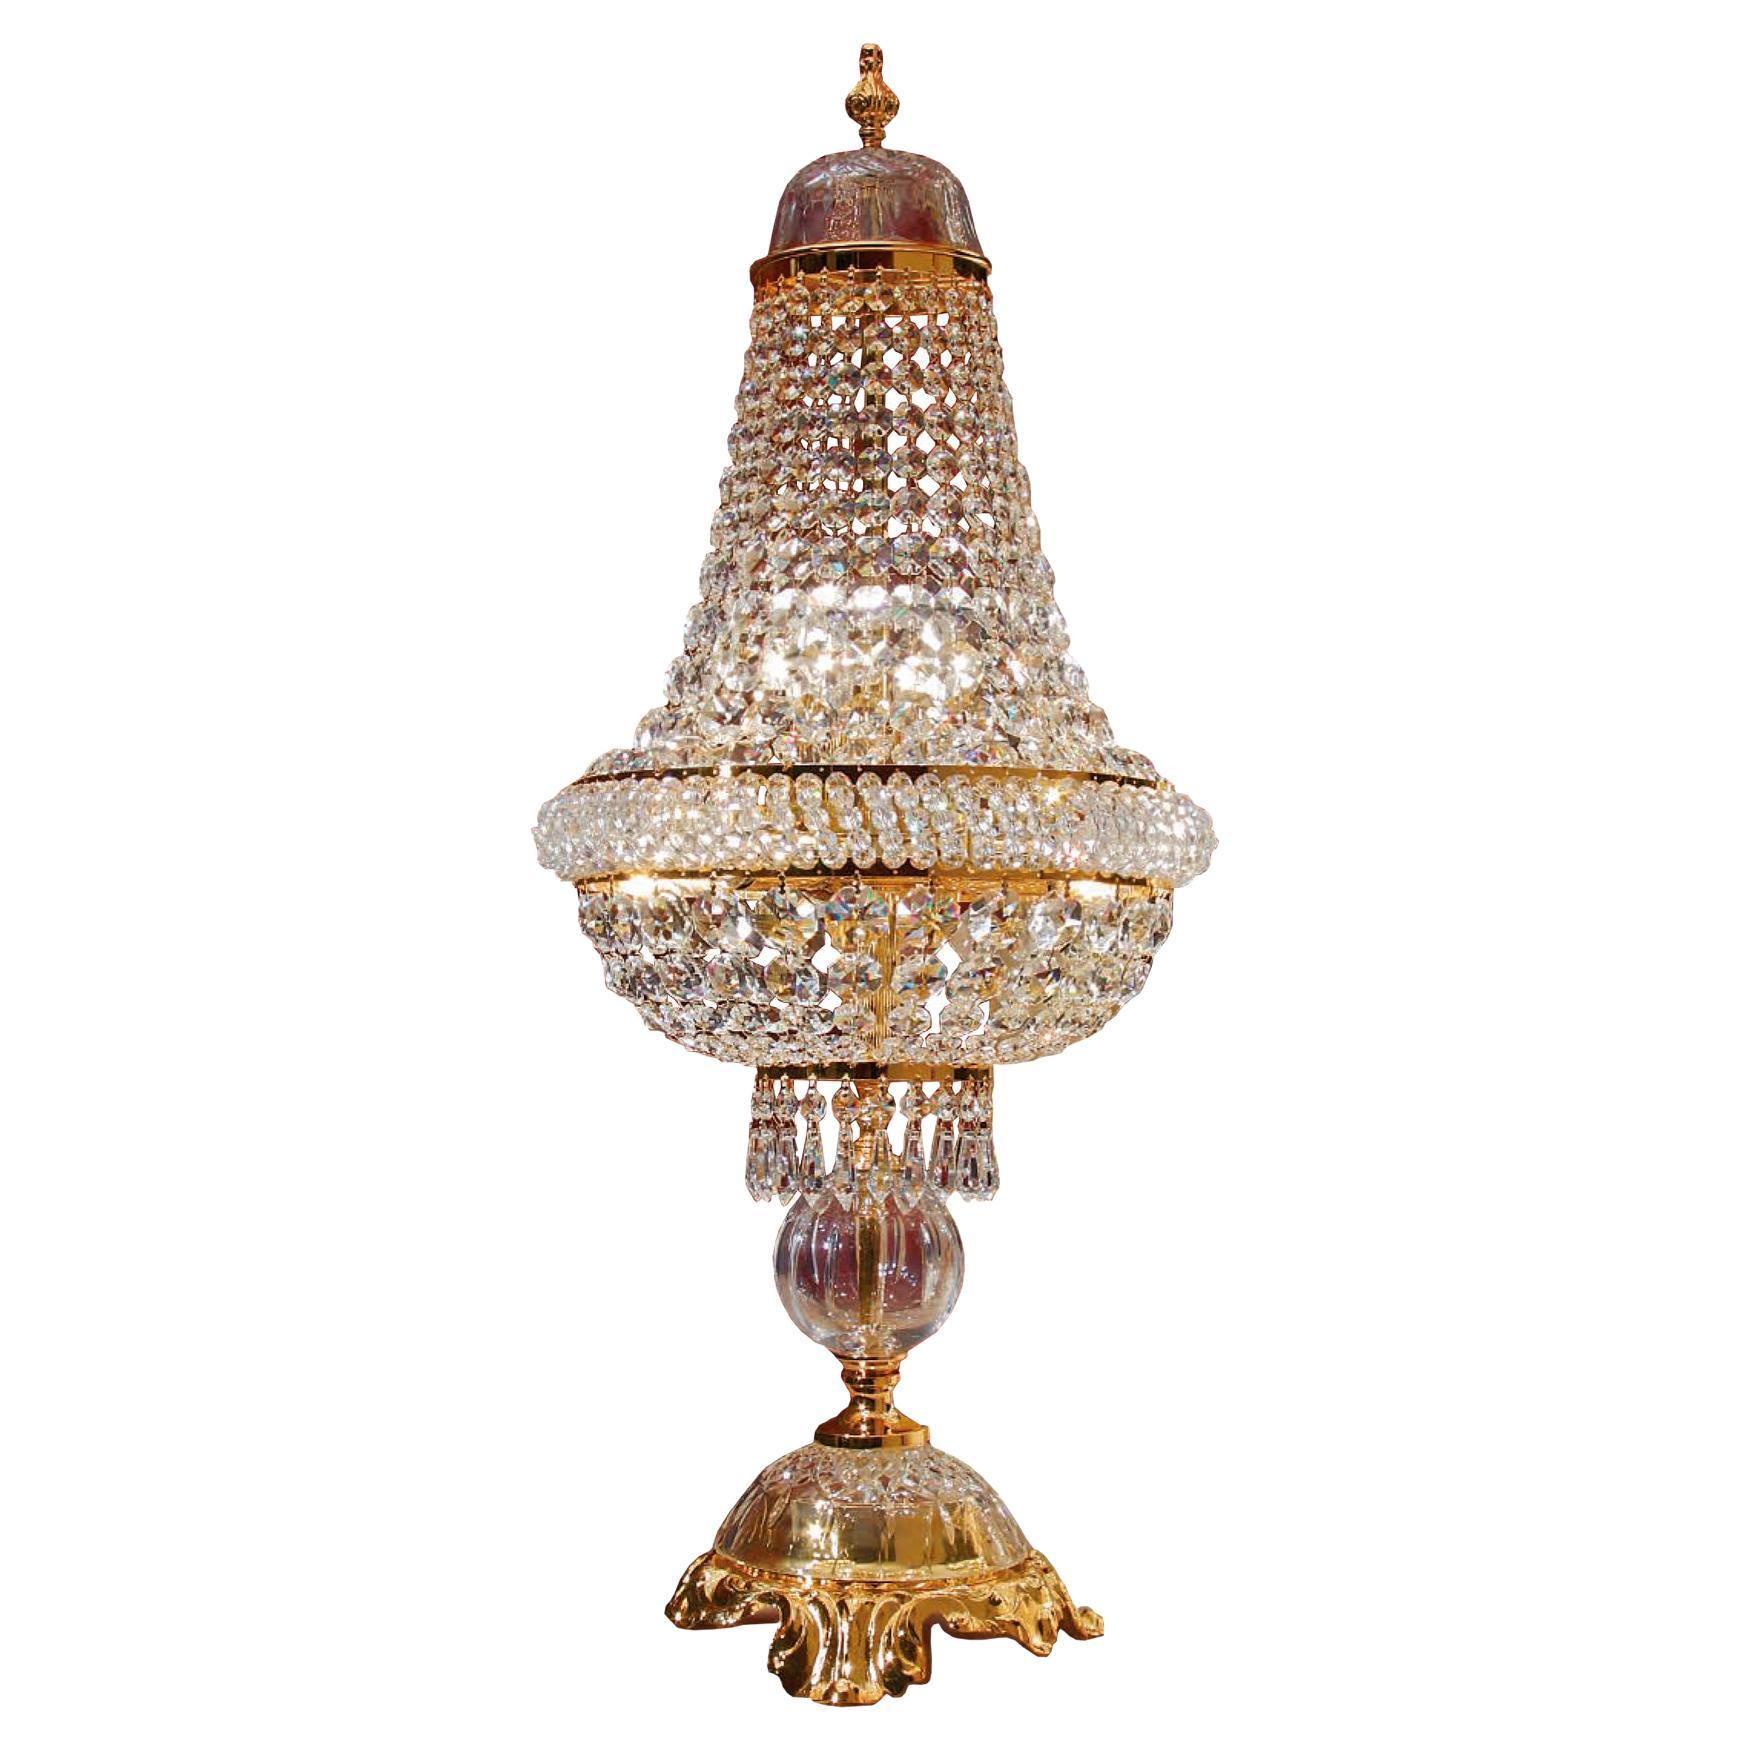 5 Lights Table Lamp in 24kt Gold Finish Embellished with Clear Scholer Crystals For Sale